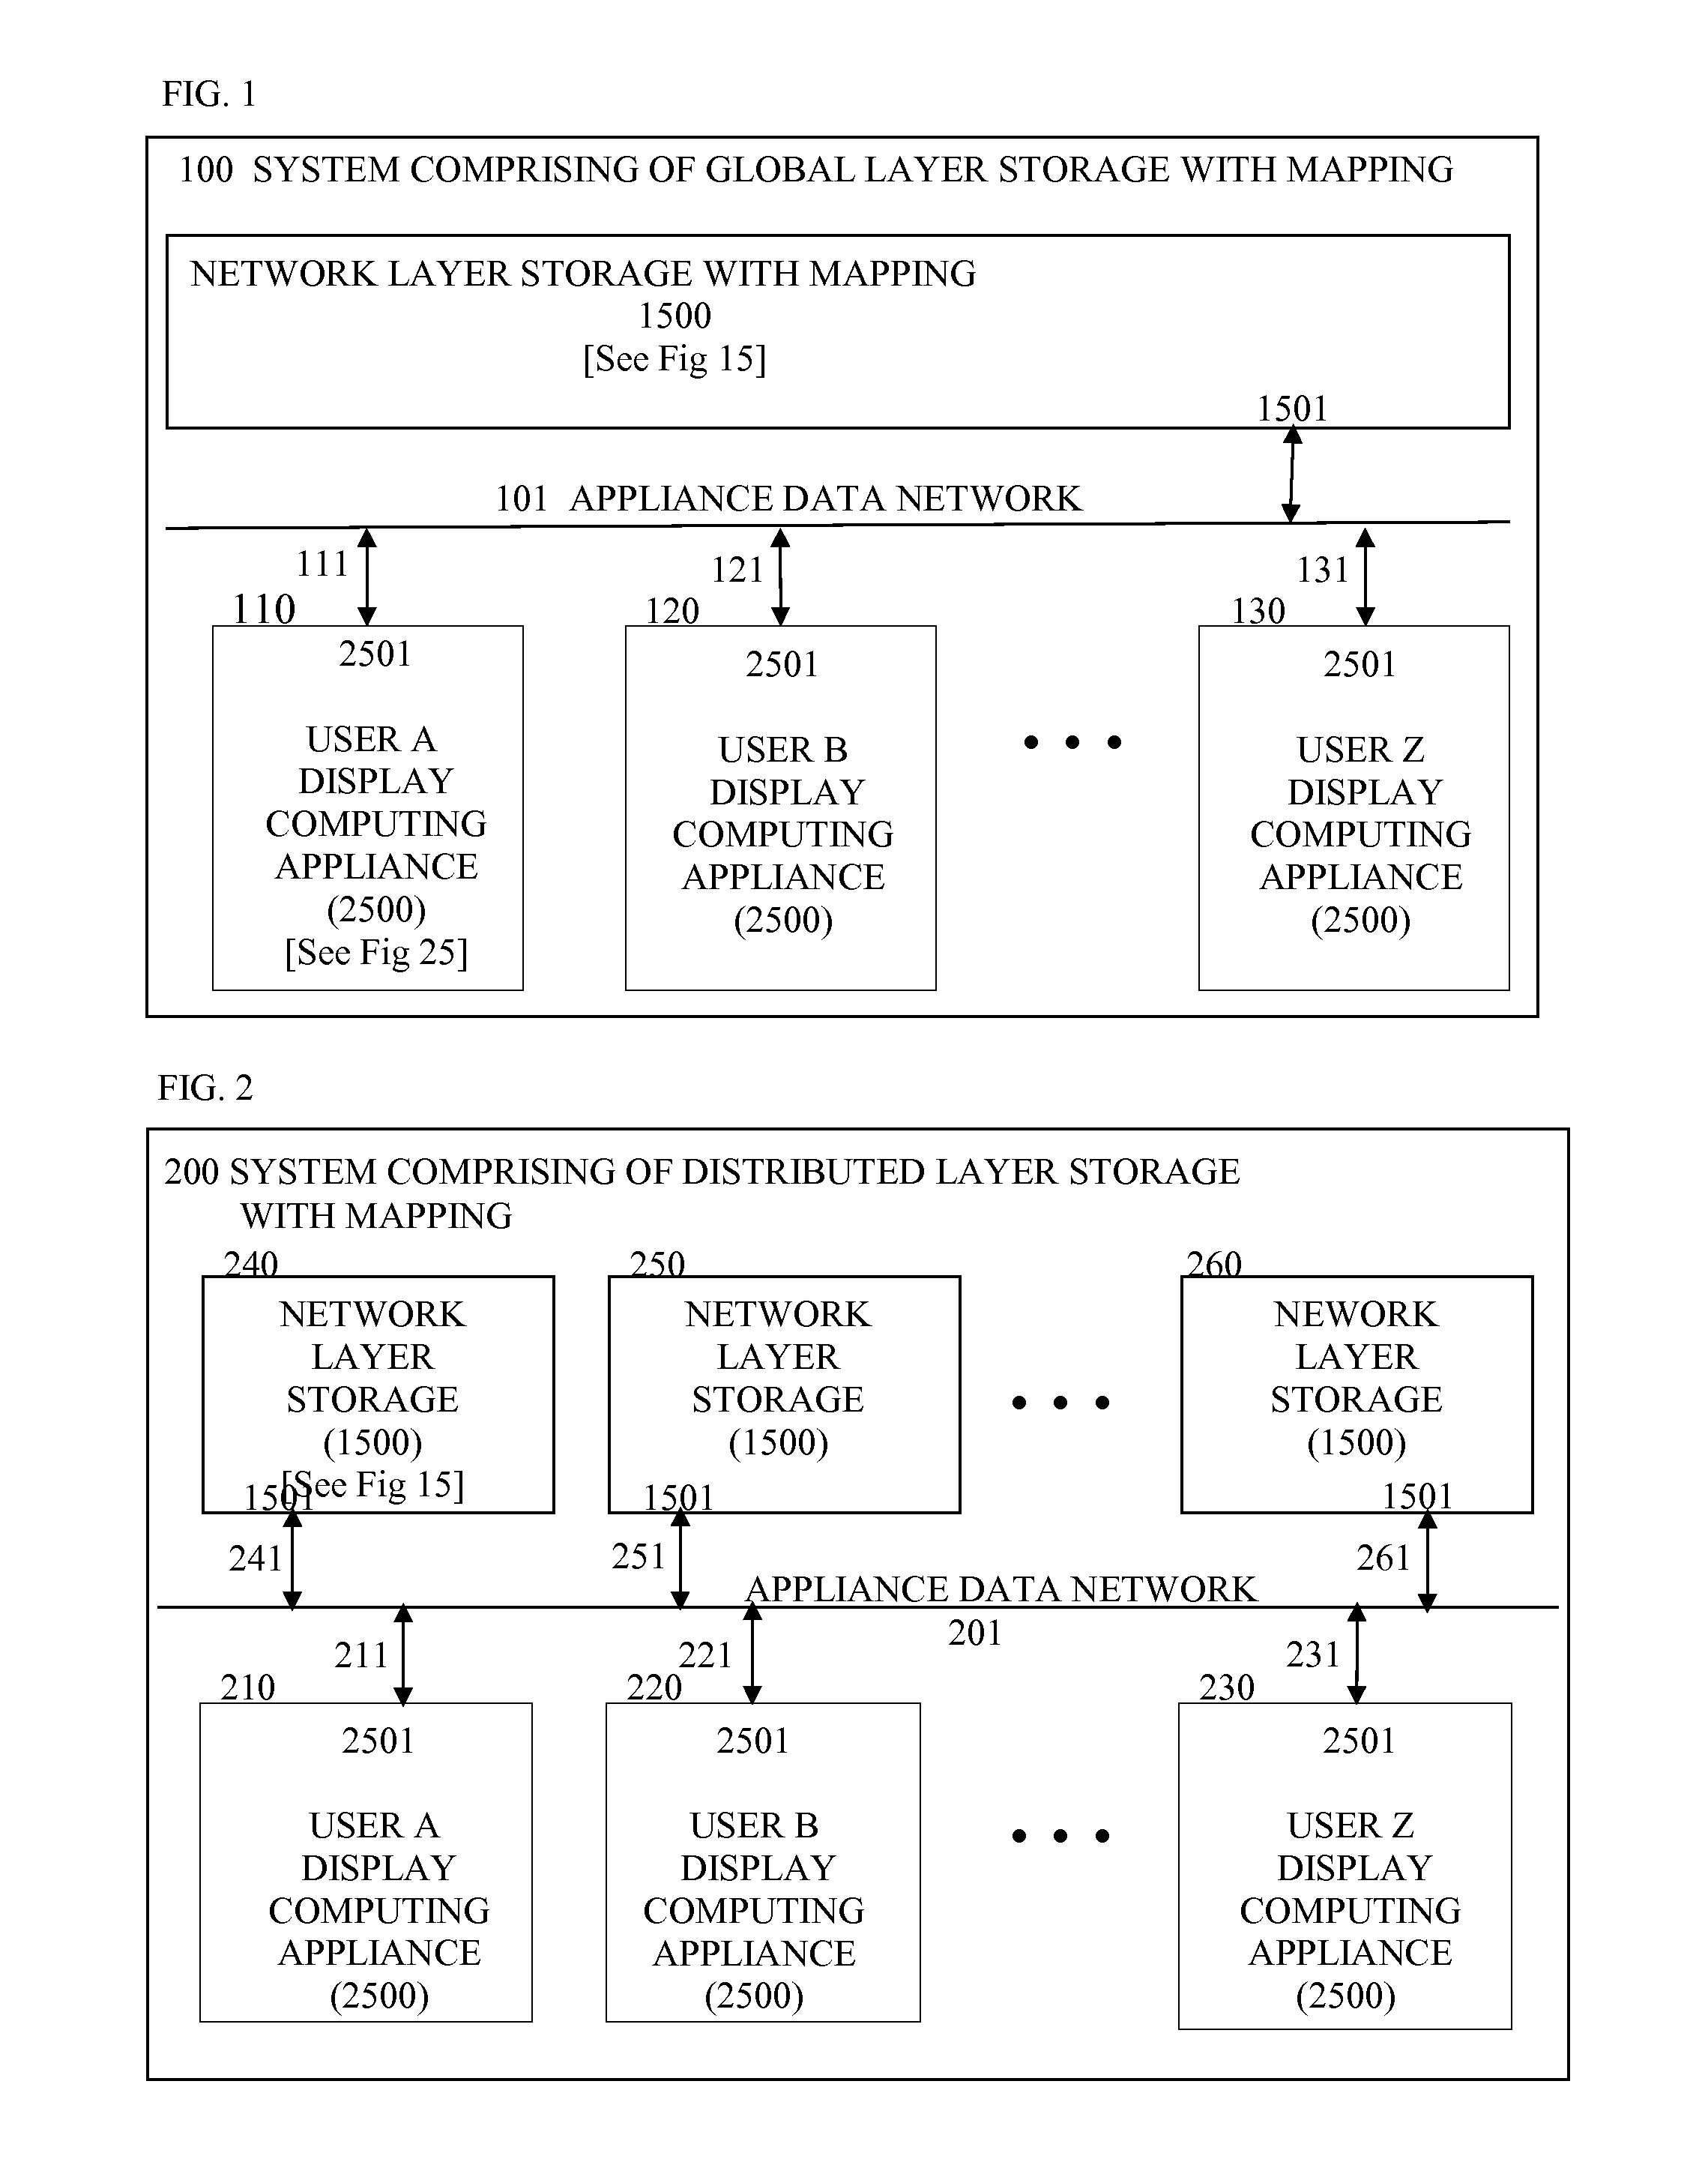 Systems And Methods Providing Collaborating Among A Plurality Of Users Each At A Respective Computing Appliance, And Providing Storage In Respective Data Layers Of Respective User Data, Provided Responsive To A Respective User Input, And Utilizing Event Processing Of Event Content Stored In The Data Layers